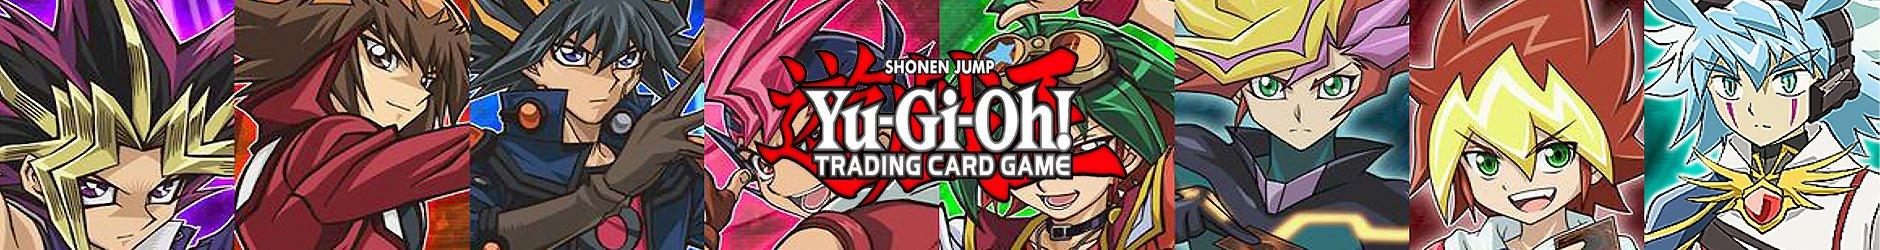 Yu-Gi-Oh! Featured Products - Romulus Games